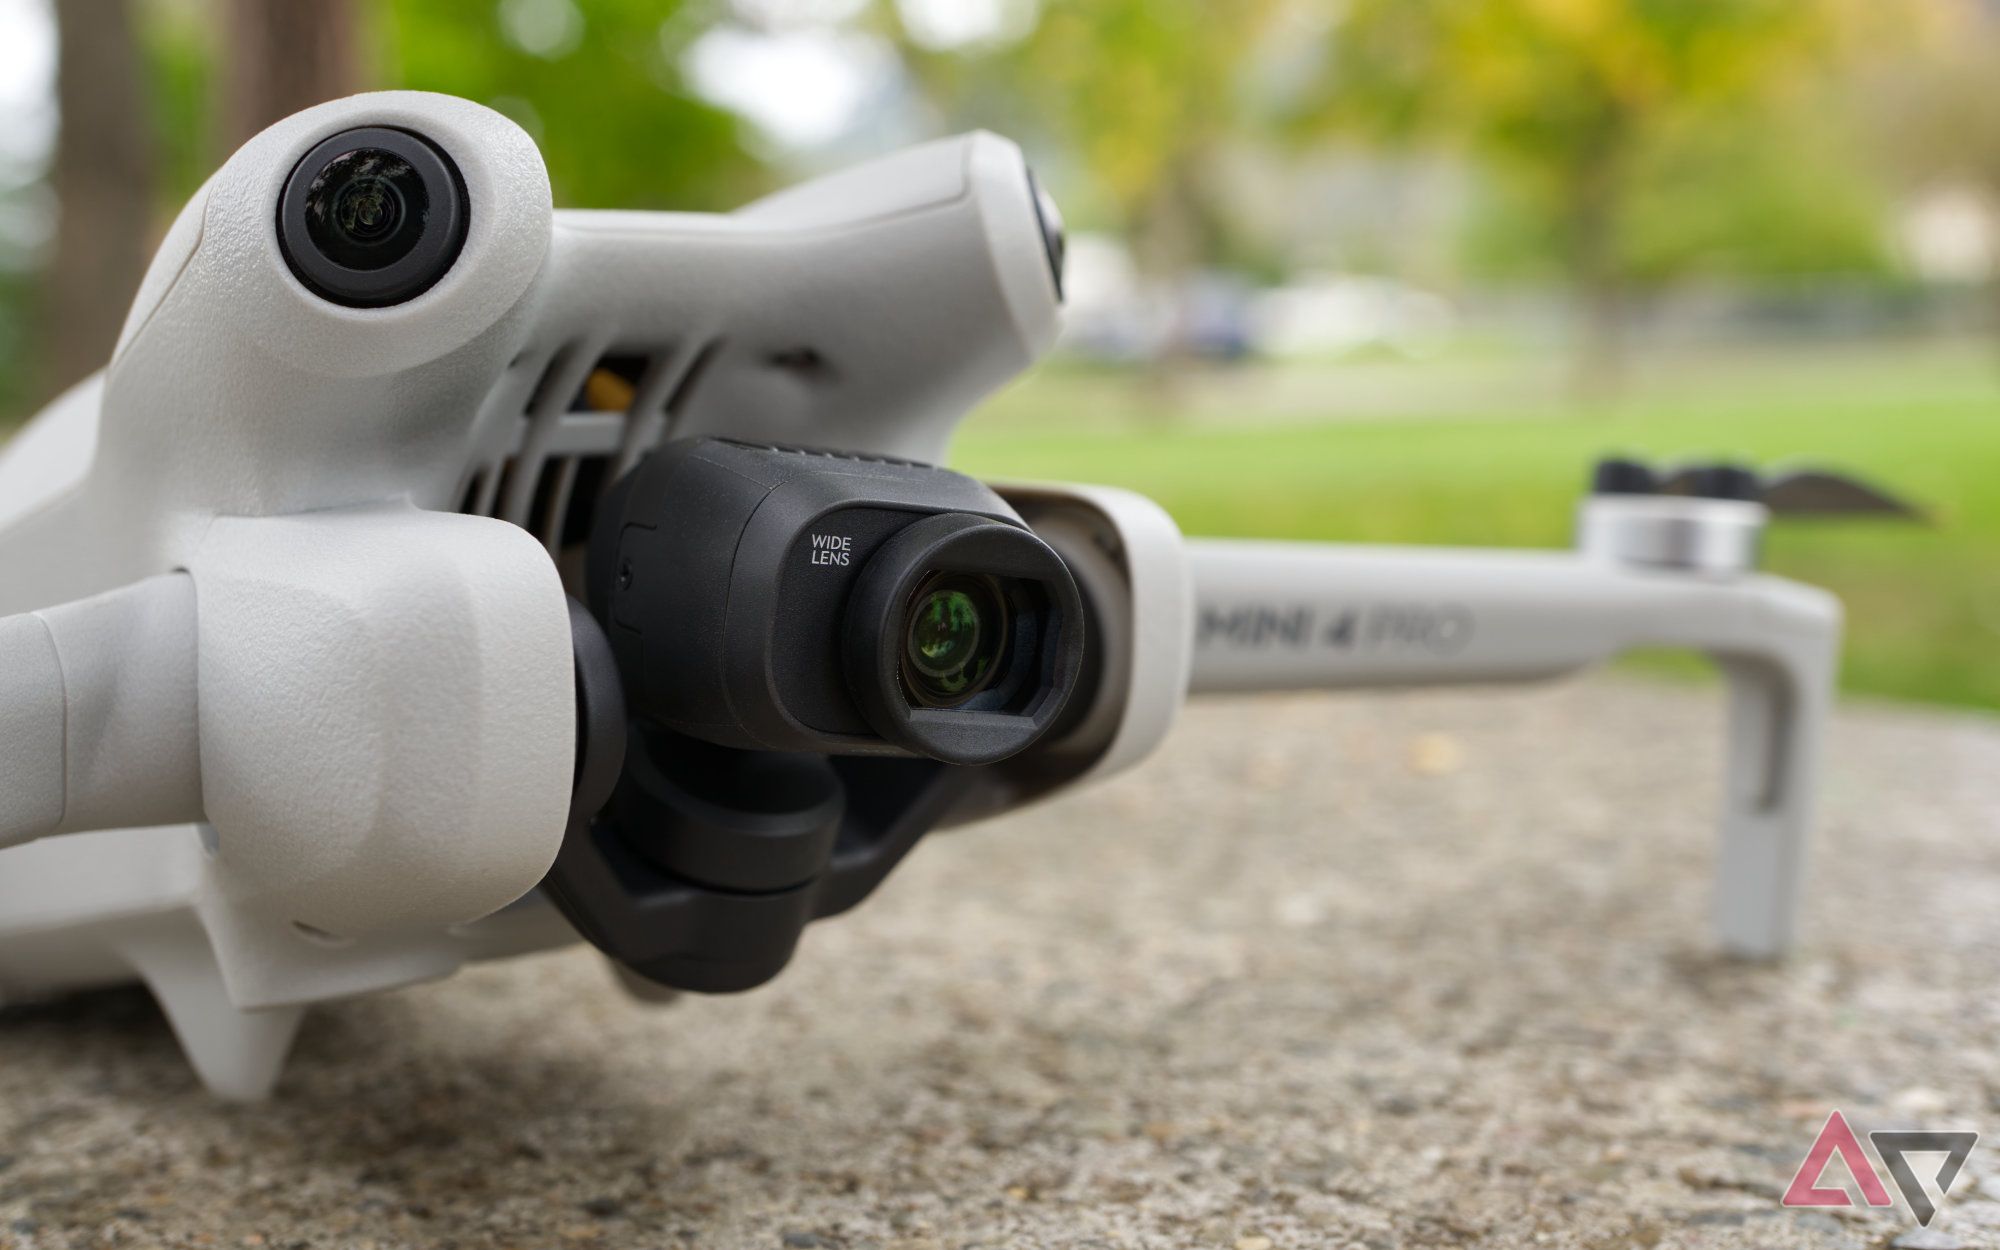 DJI Mini 4 Pro with Wide Angle lens, sitting on concrete with greenery in the background